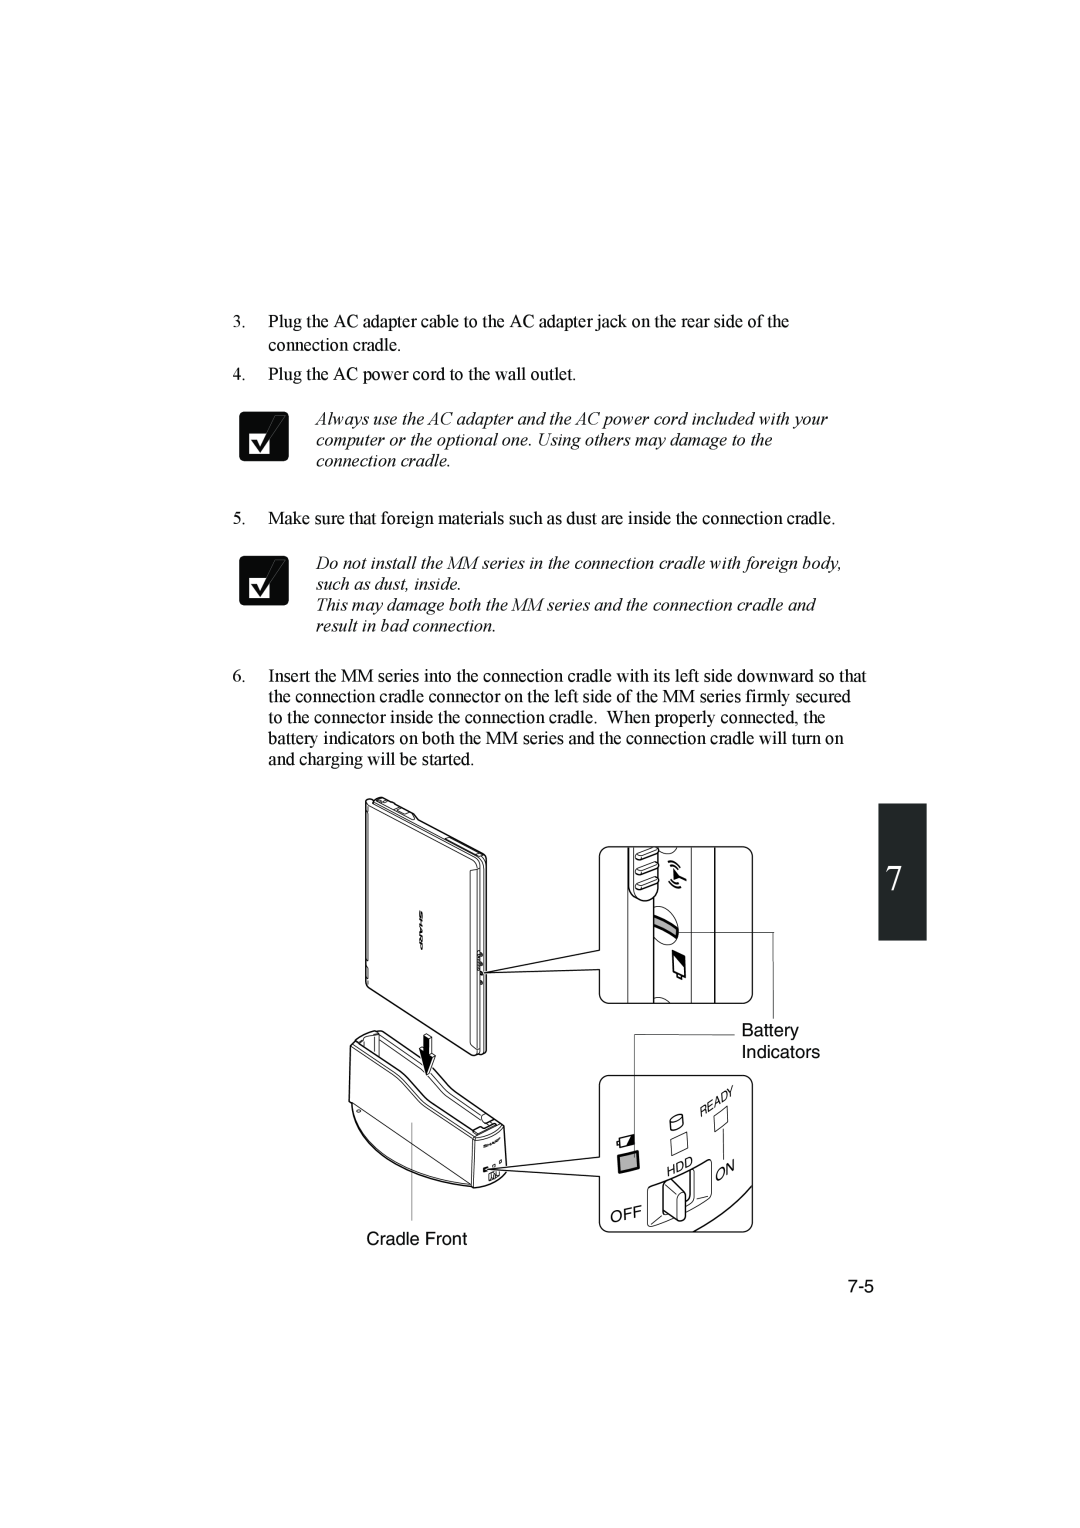 Sharp PC-MM1 manual Plug the AC power cord to the wall outlet 